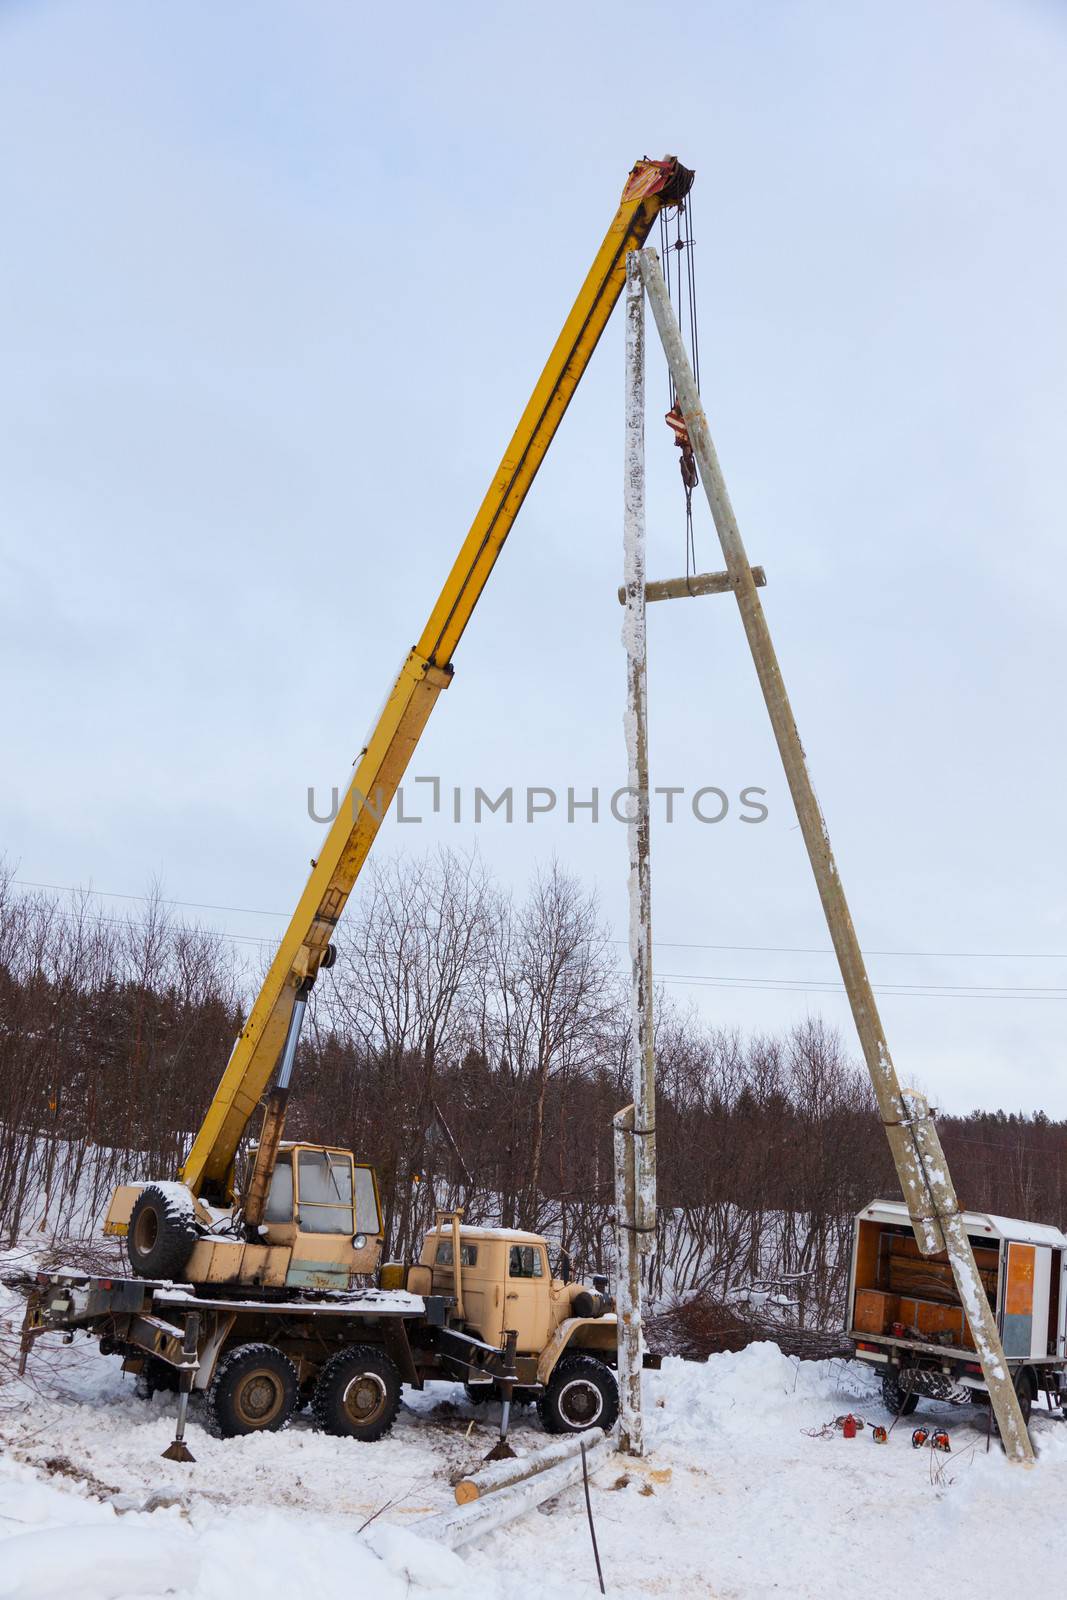 Construction of power lines using a mobile crane  by AleksandrN